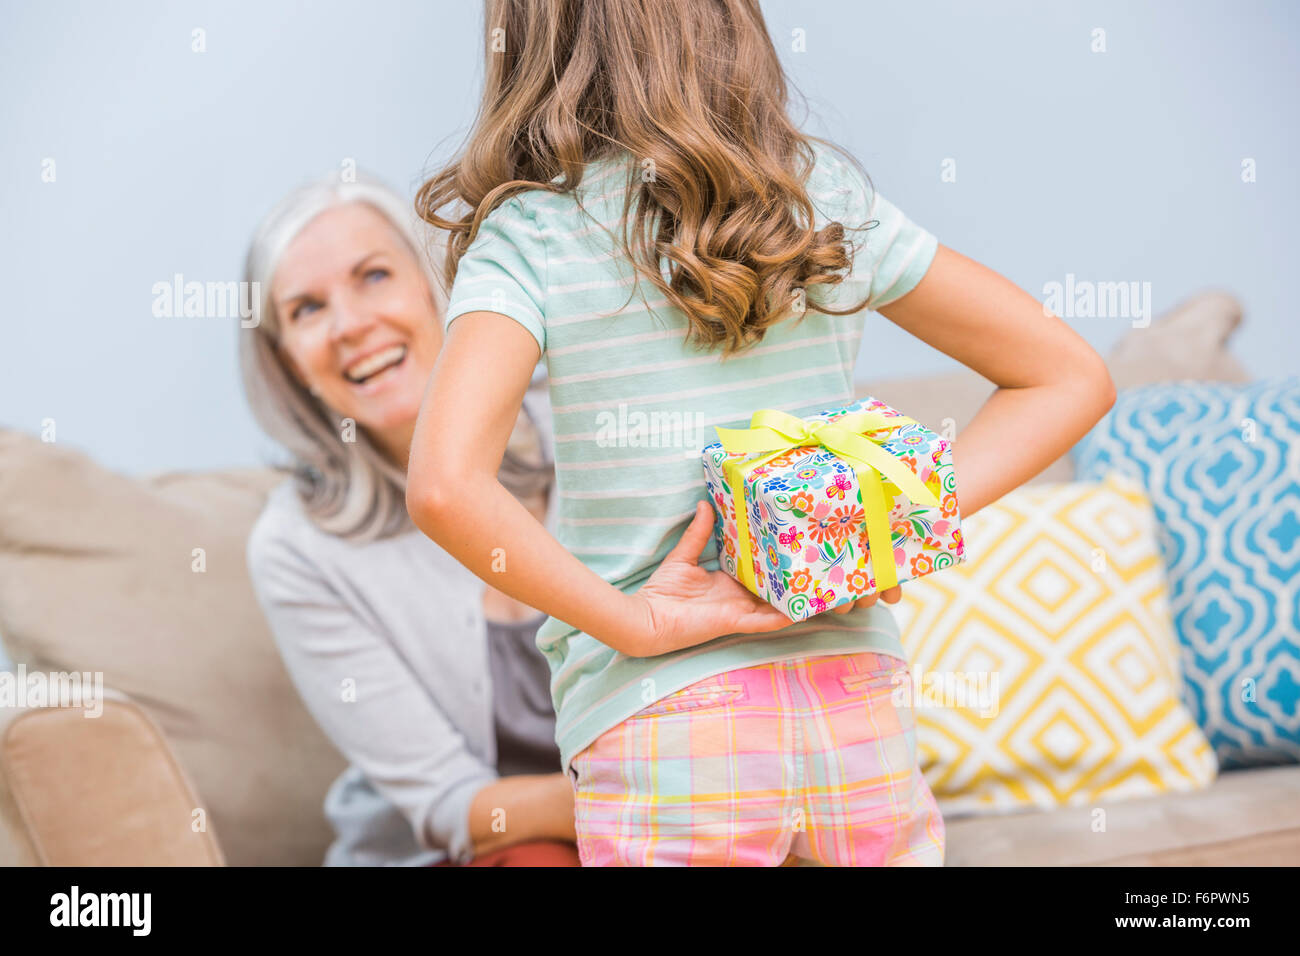 Caucasian girl hiding gift for grandmother behind back Stock Photo